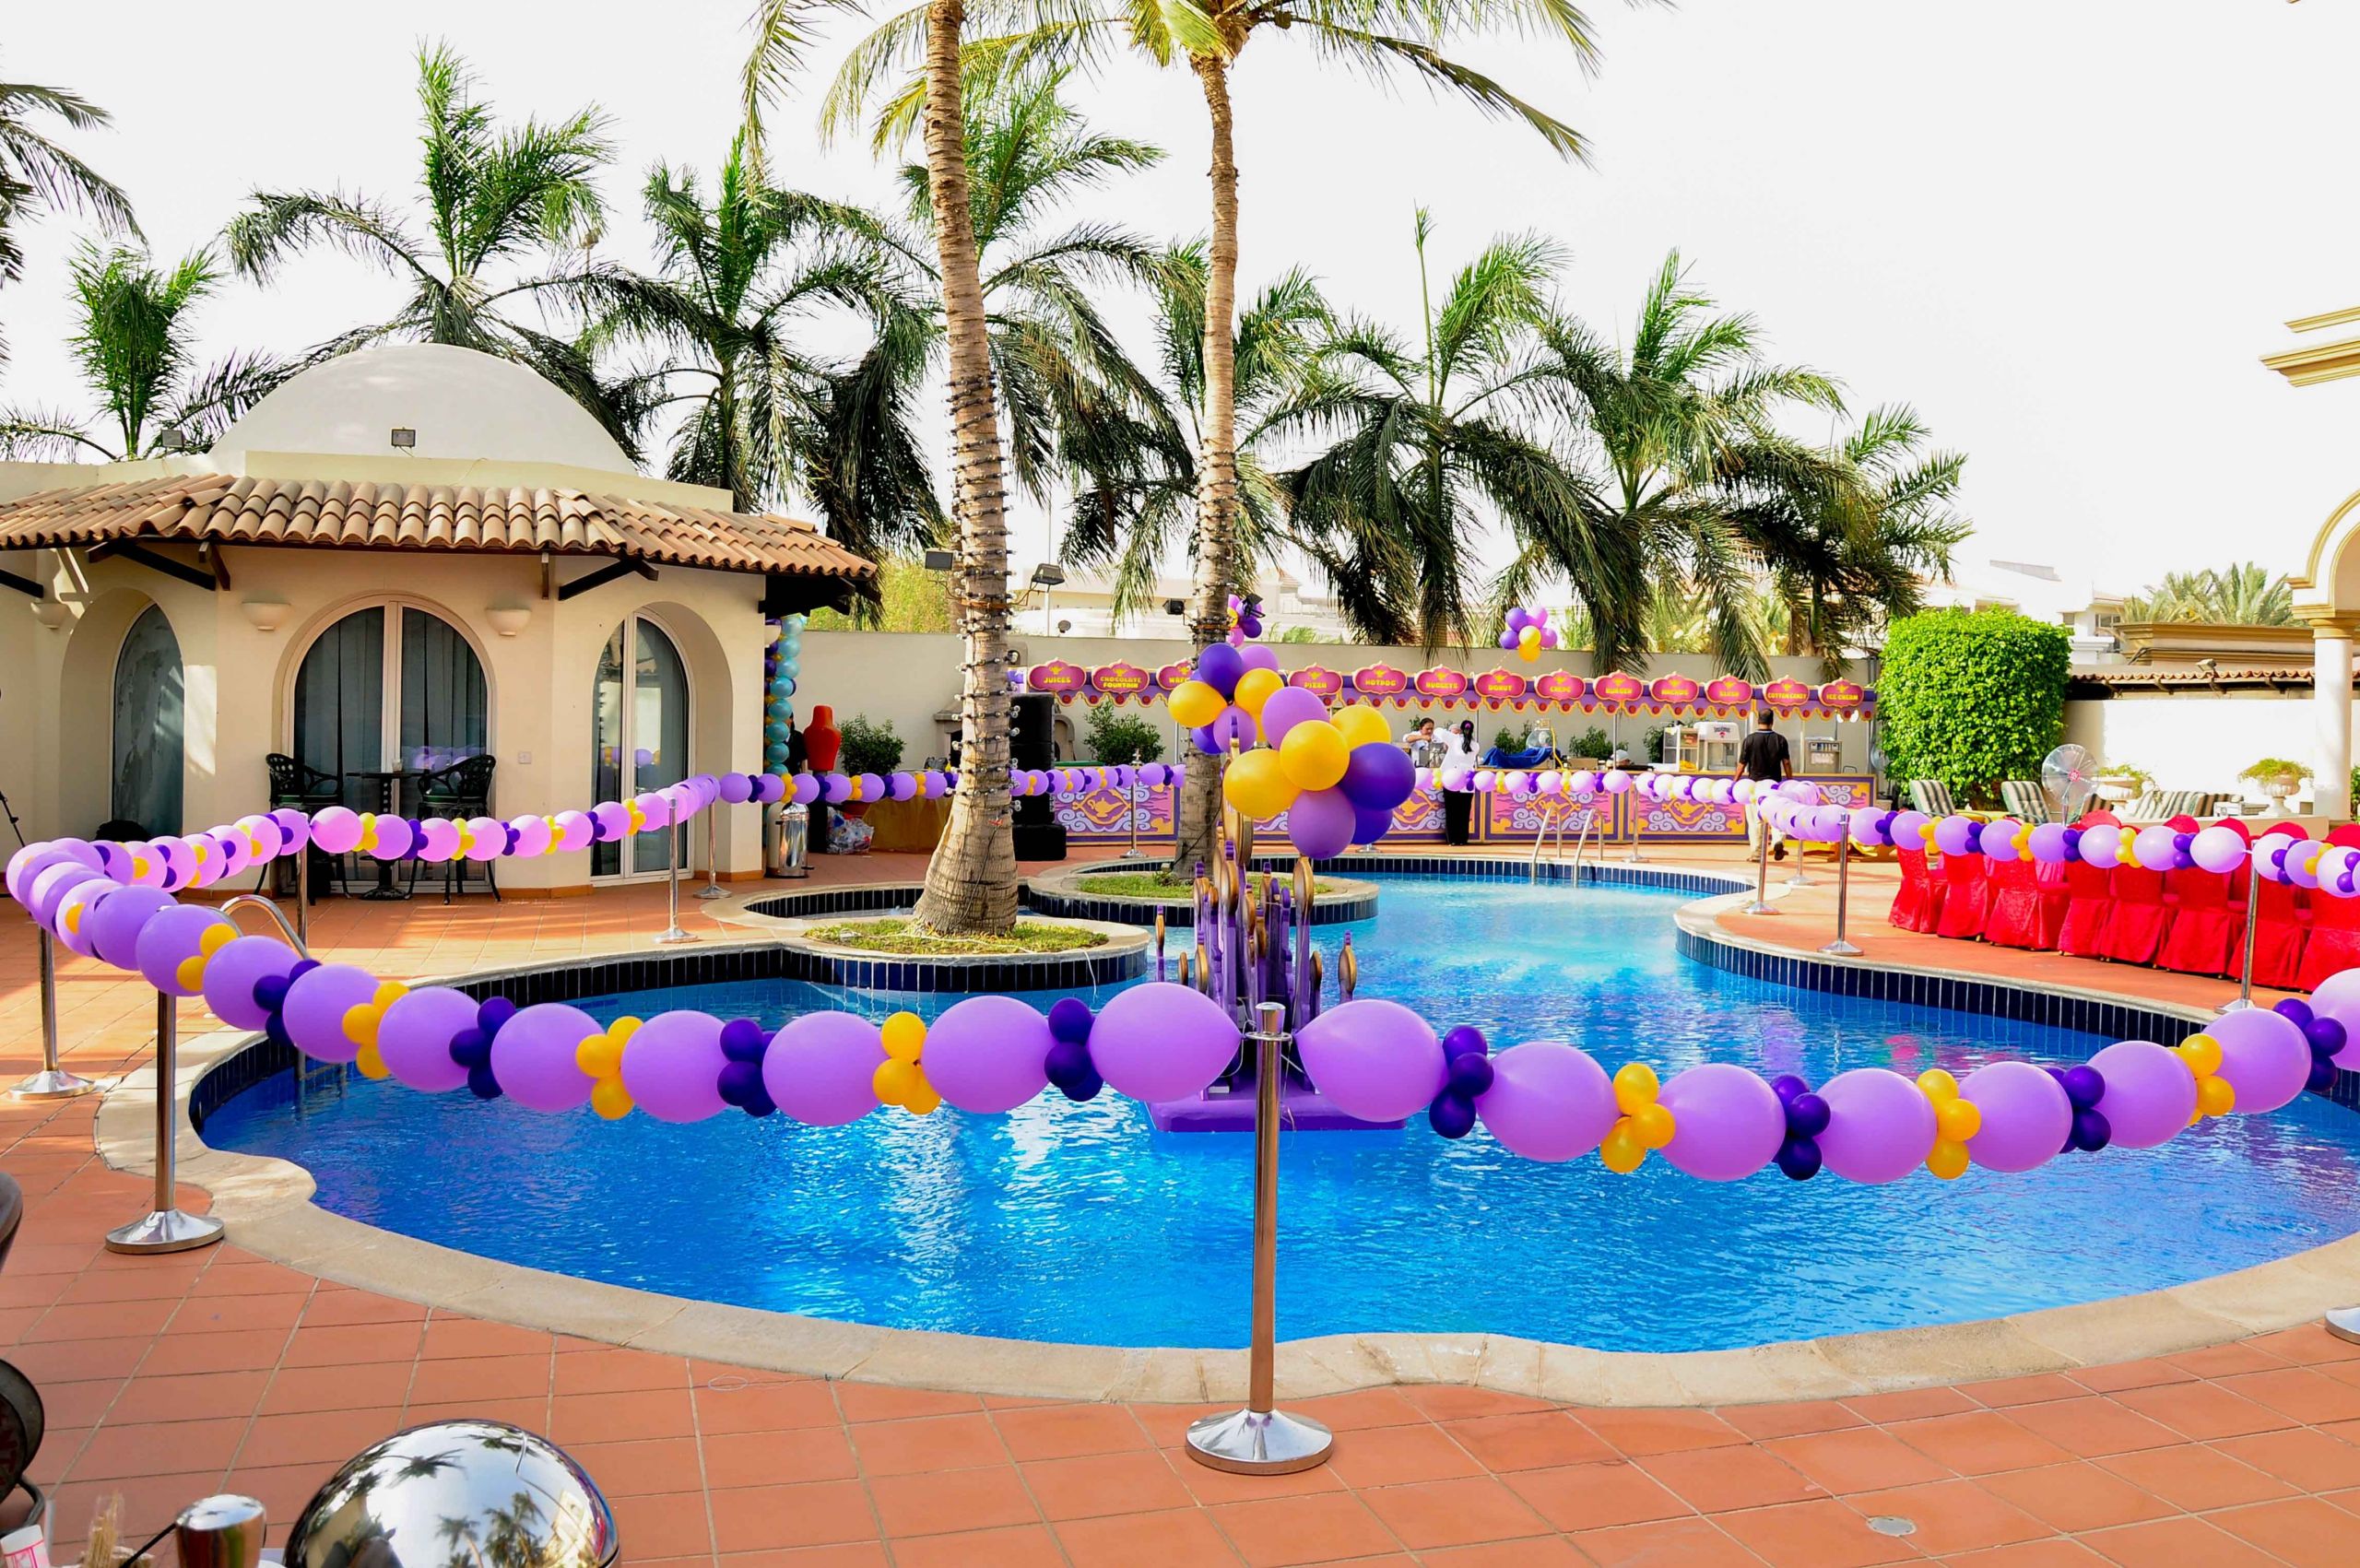 Princess Pool Party Ideas
 Link a Loon Balloon Decoration around the Pool for the